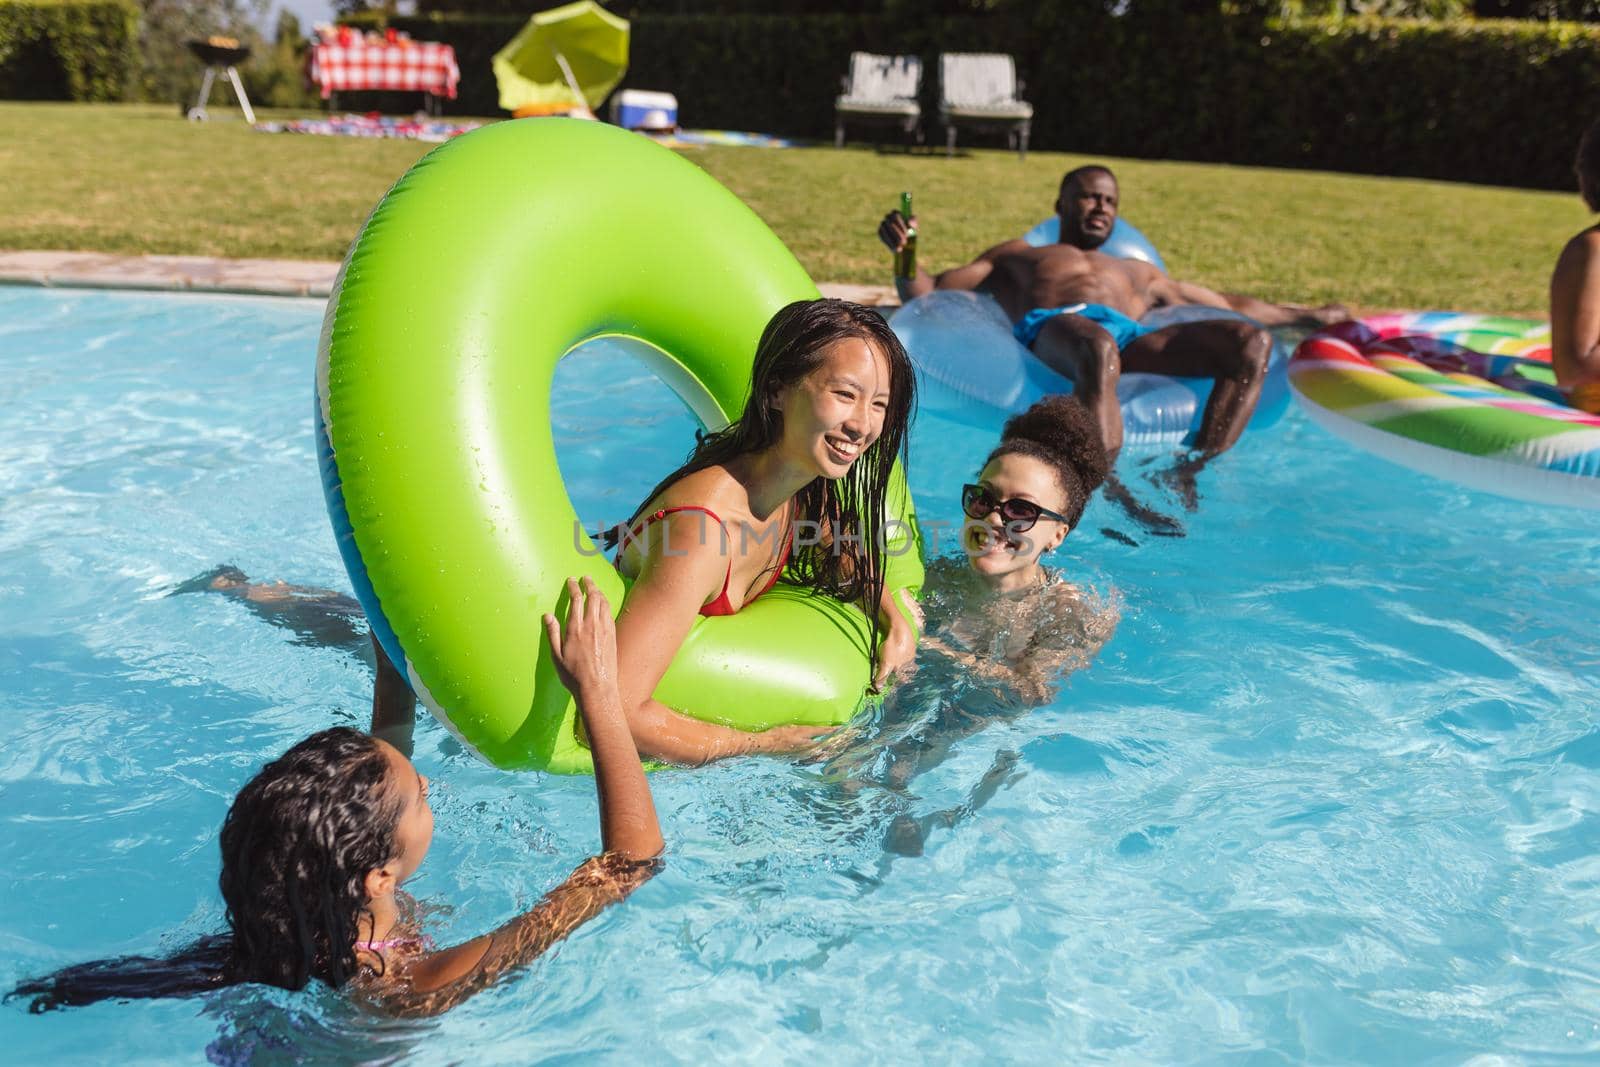 Diverse group of friends having fun playing on inflatables in swimming pool by Wavebreakmedia